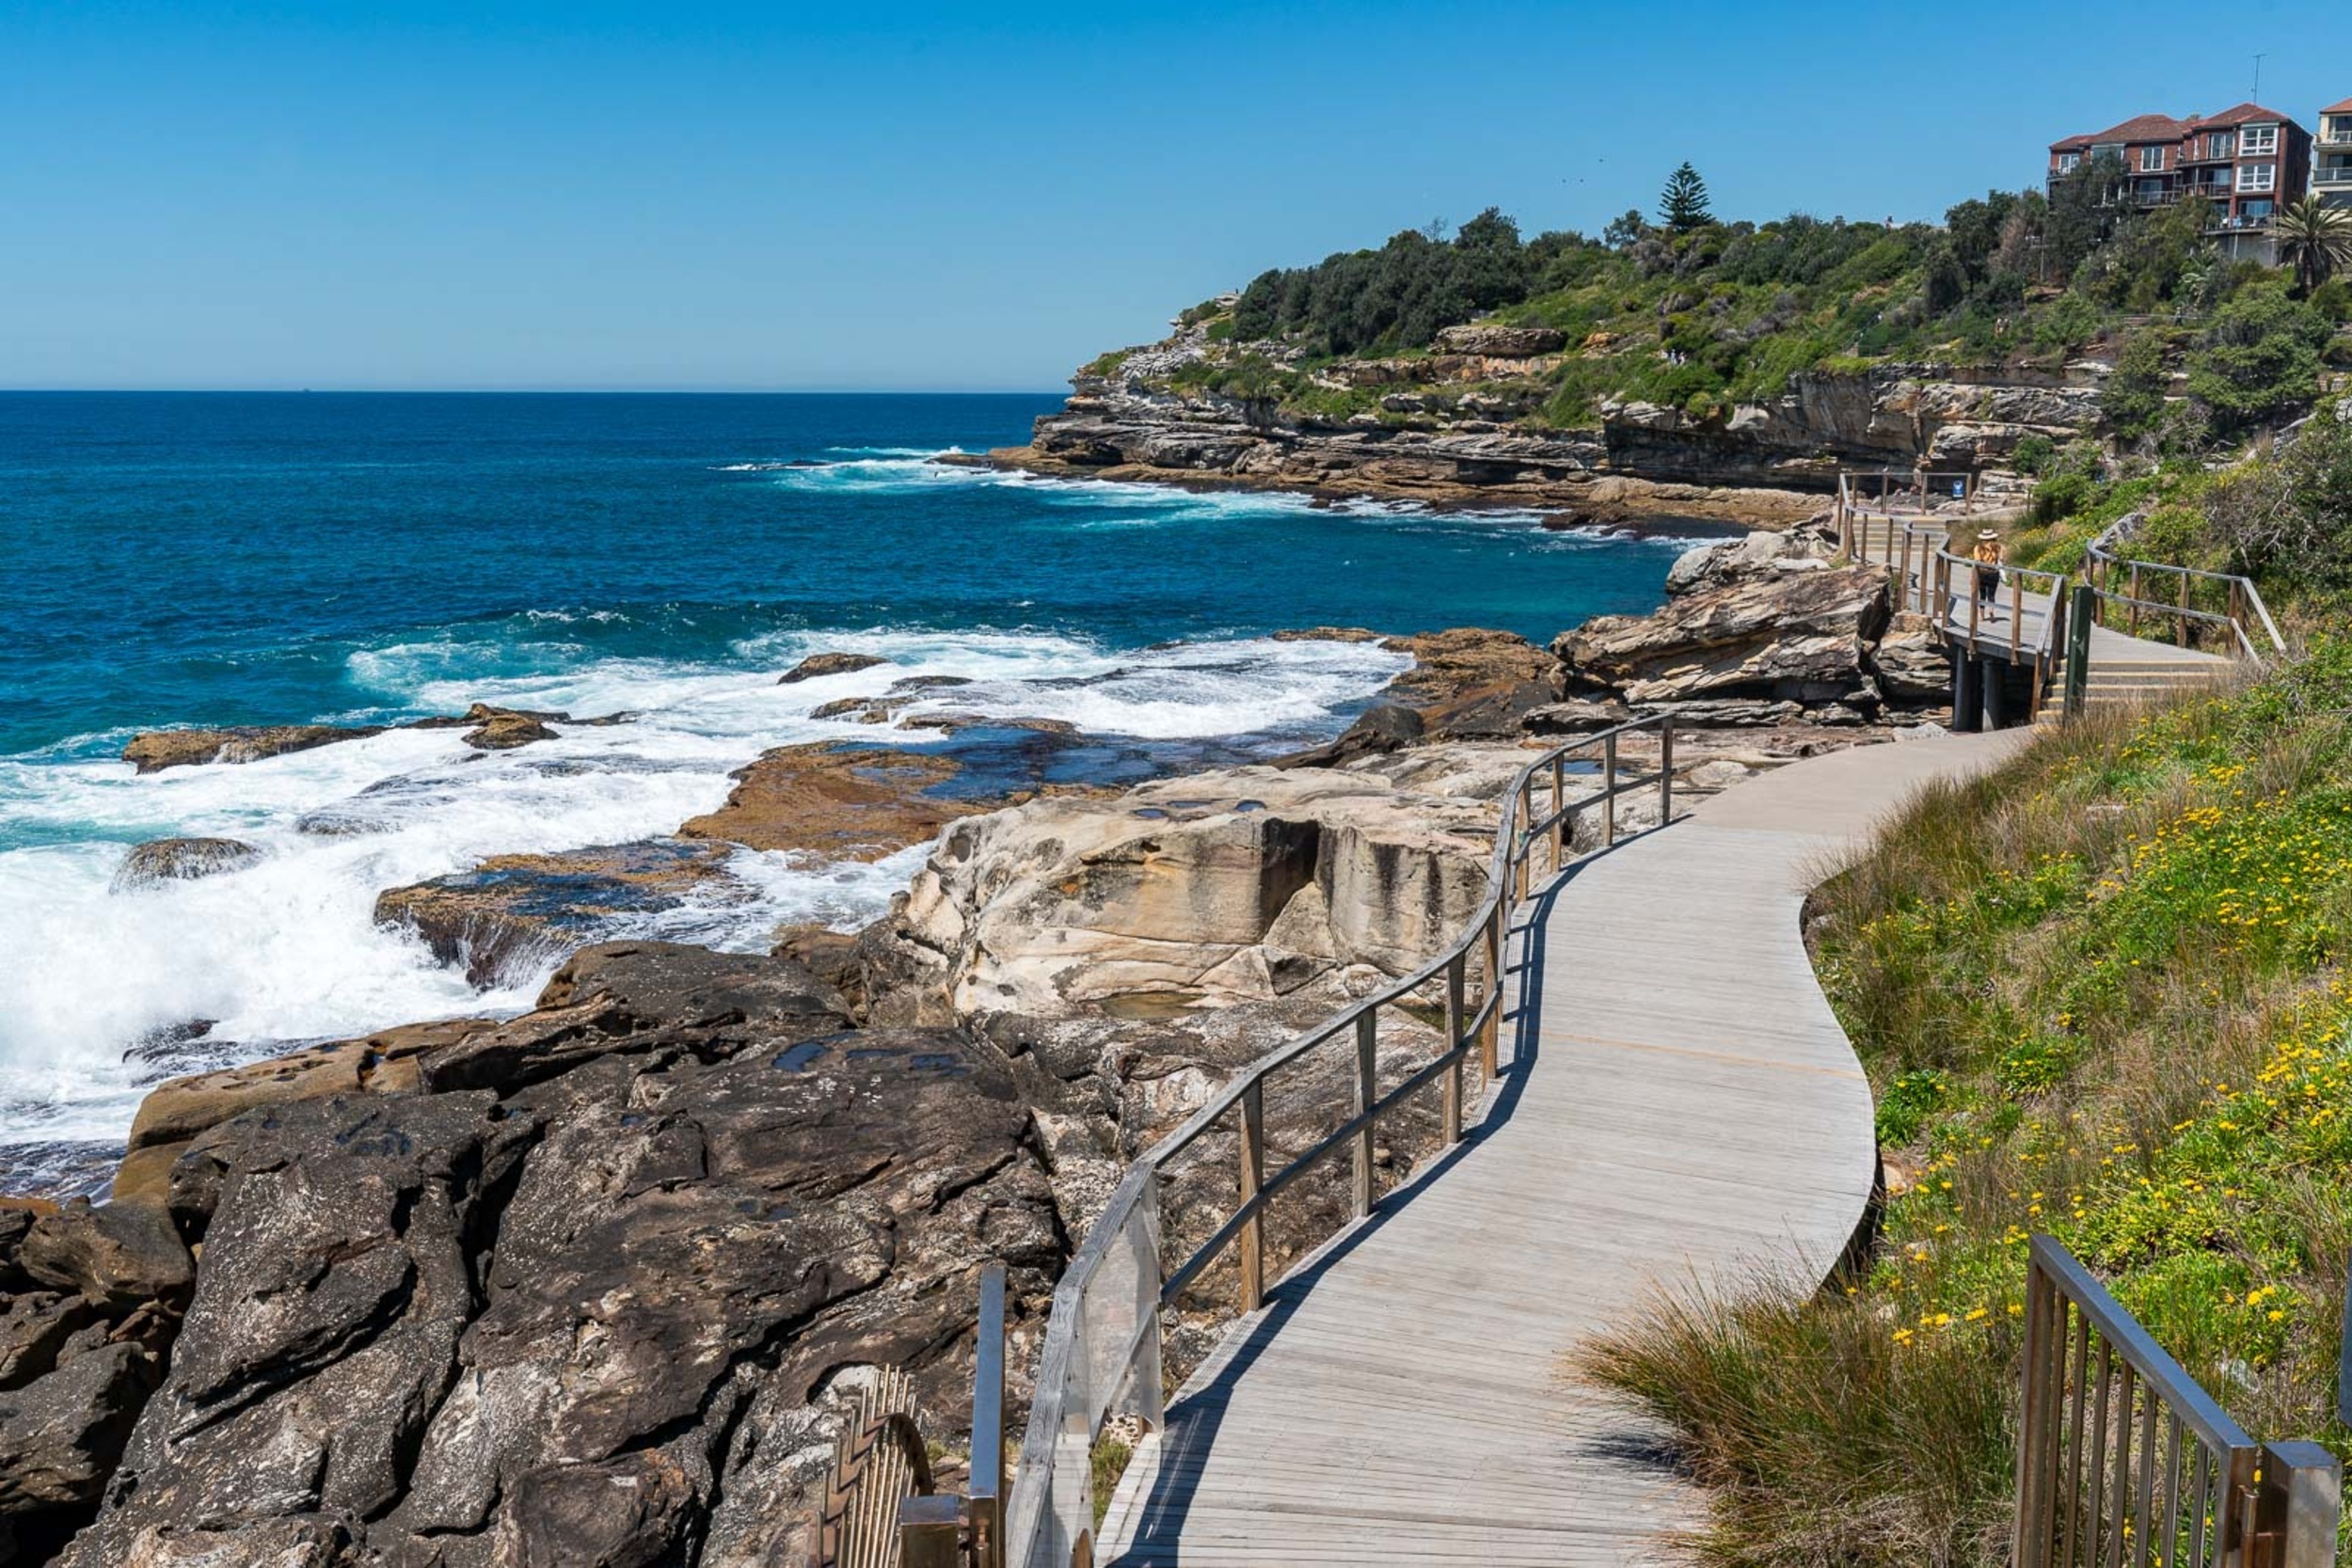 <p>Stroll along rugged cliffs while passing beaches along the way. Some people like to walk without stops, but we recommend taking a dip at the beaches in between, exploring the cute little towns surrounding their serene waters.</p><p>You may also like: <a href='https://www.yardbarker.com/lifestyle/articles/20_essential_things_to_know_before_you_start_composting/s1__36137261'>20 essential things to know before you start composting</a></p>